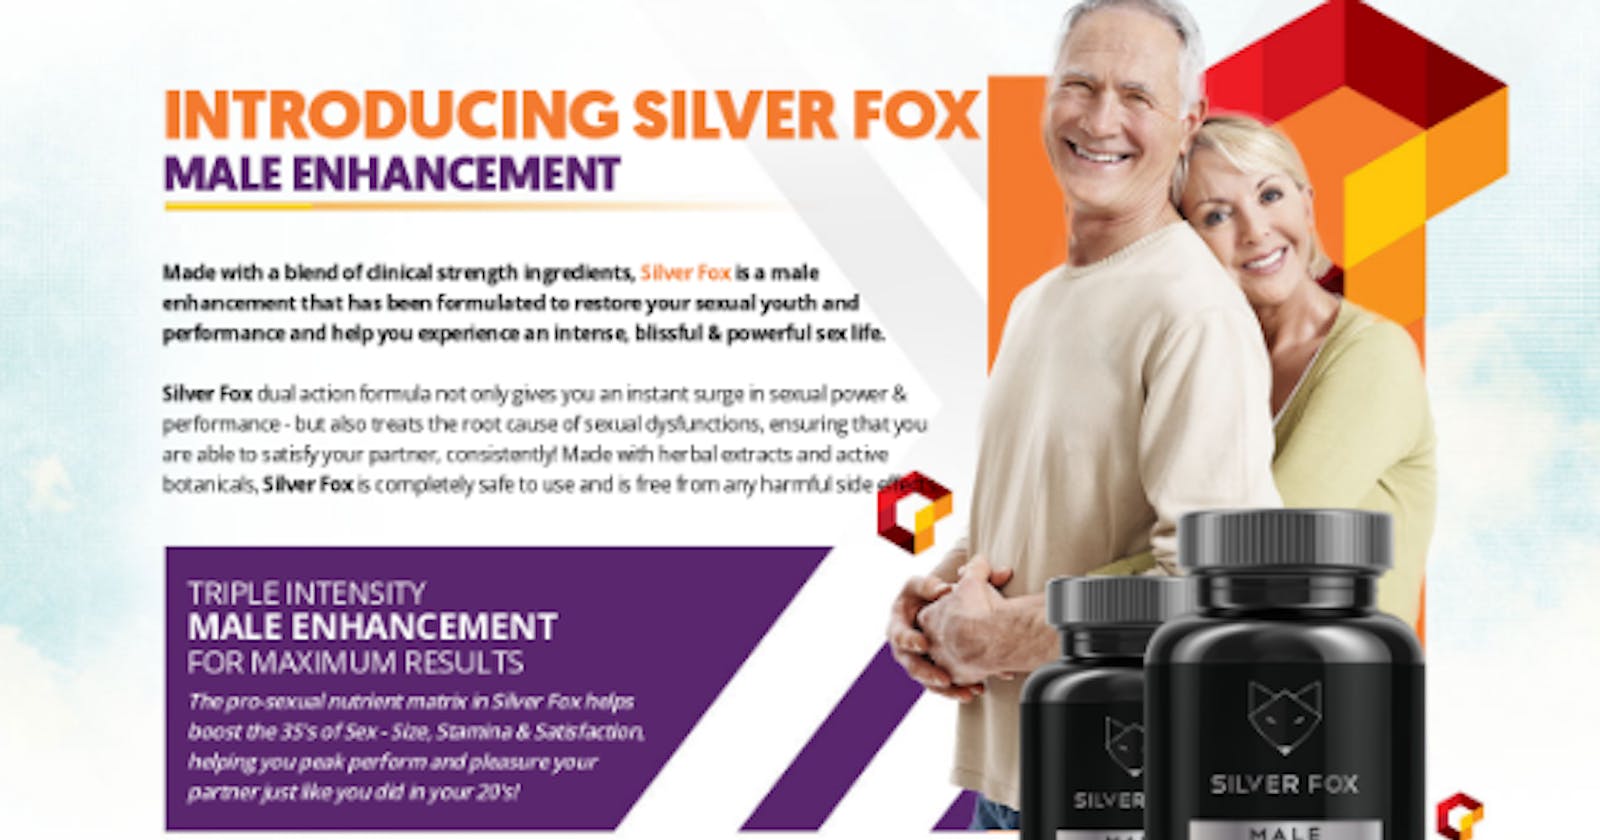 Silver Fox Male Enhancement {Scams or Legit} Does It Work Or Not? Read More